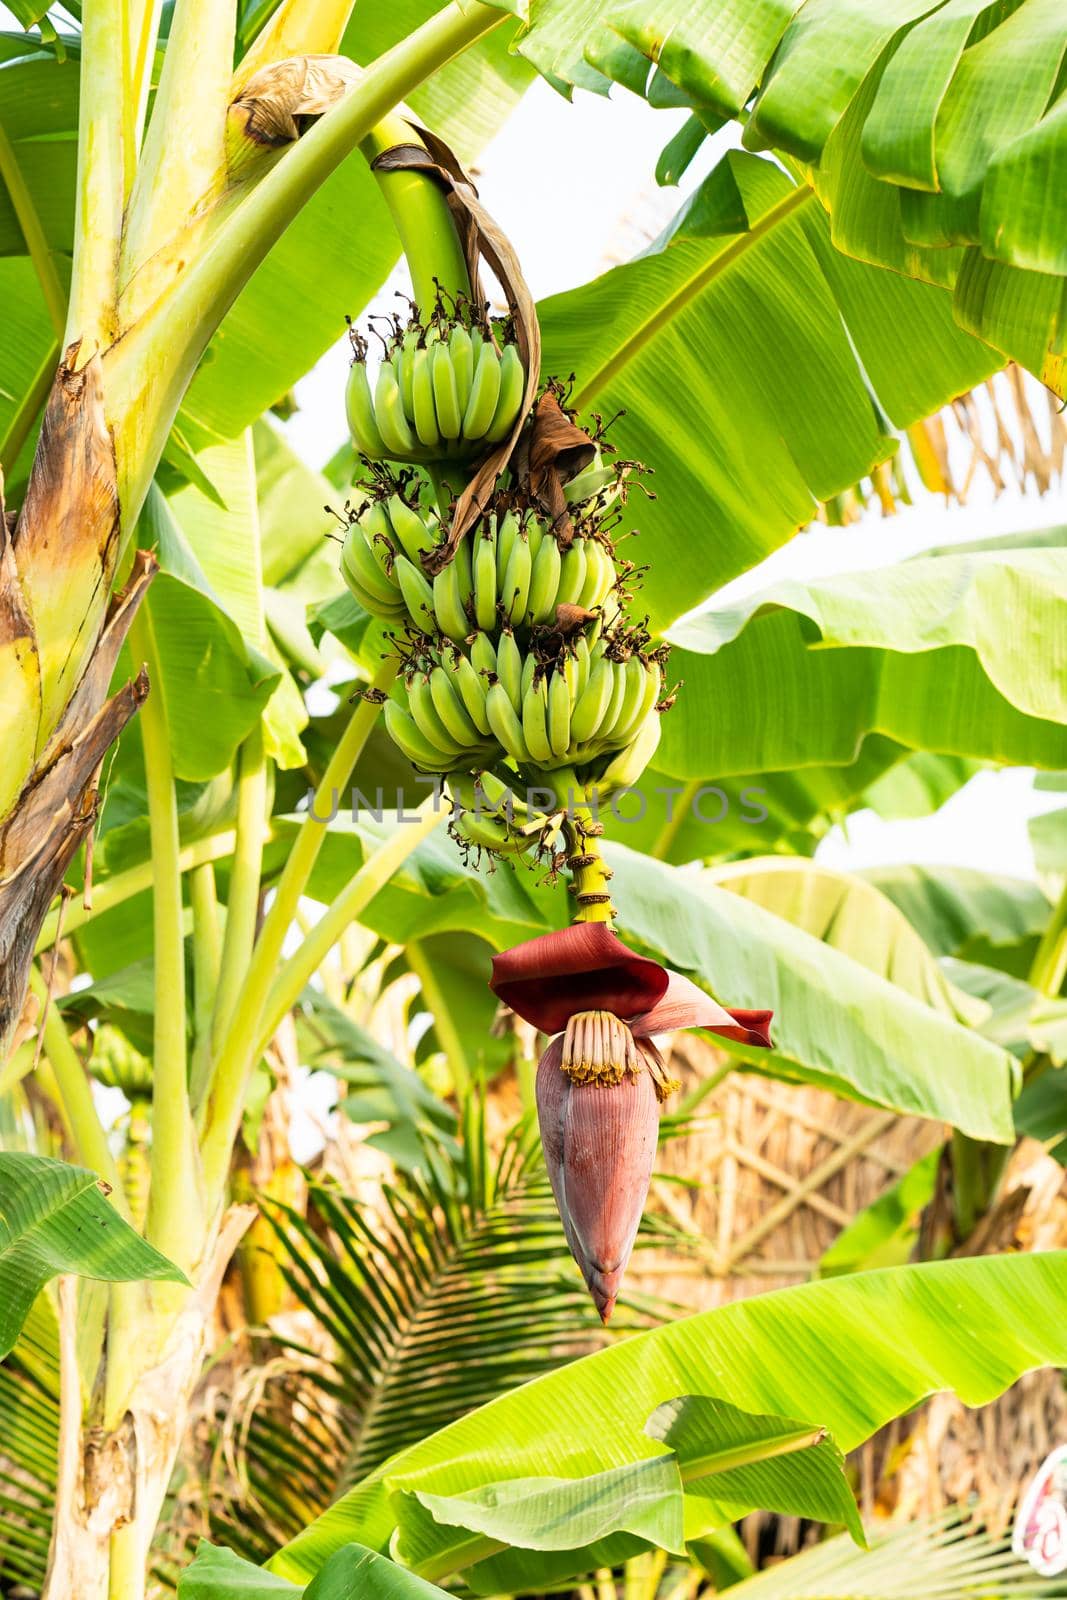 Banana flower and unripe fruits on a tree in the garden